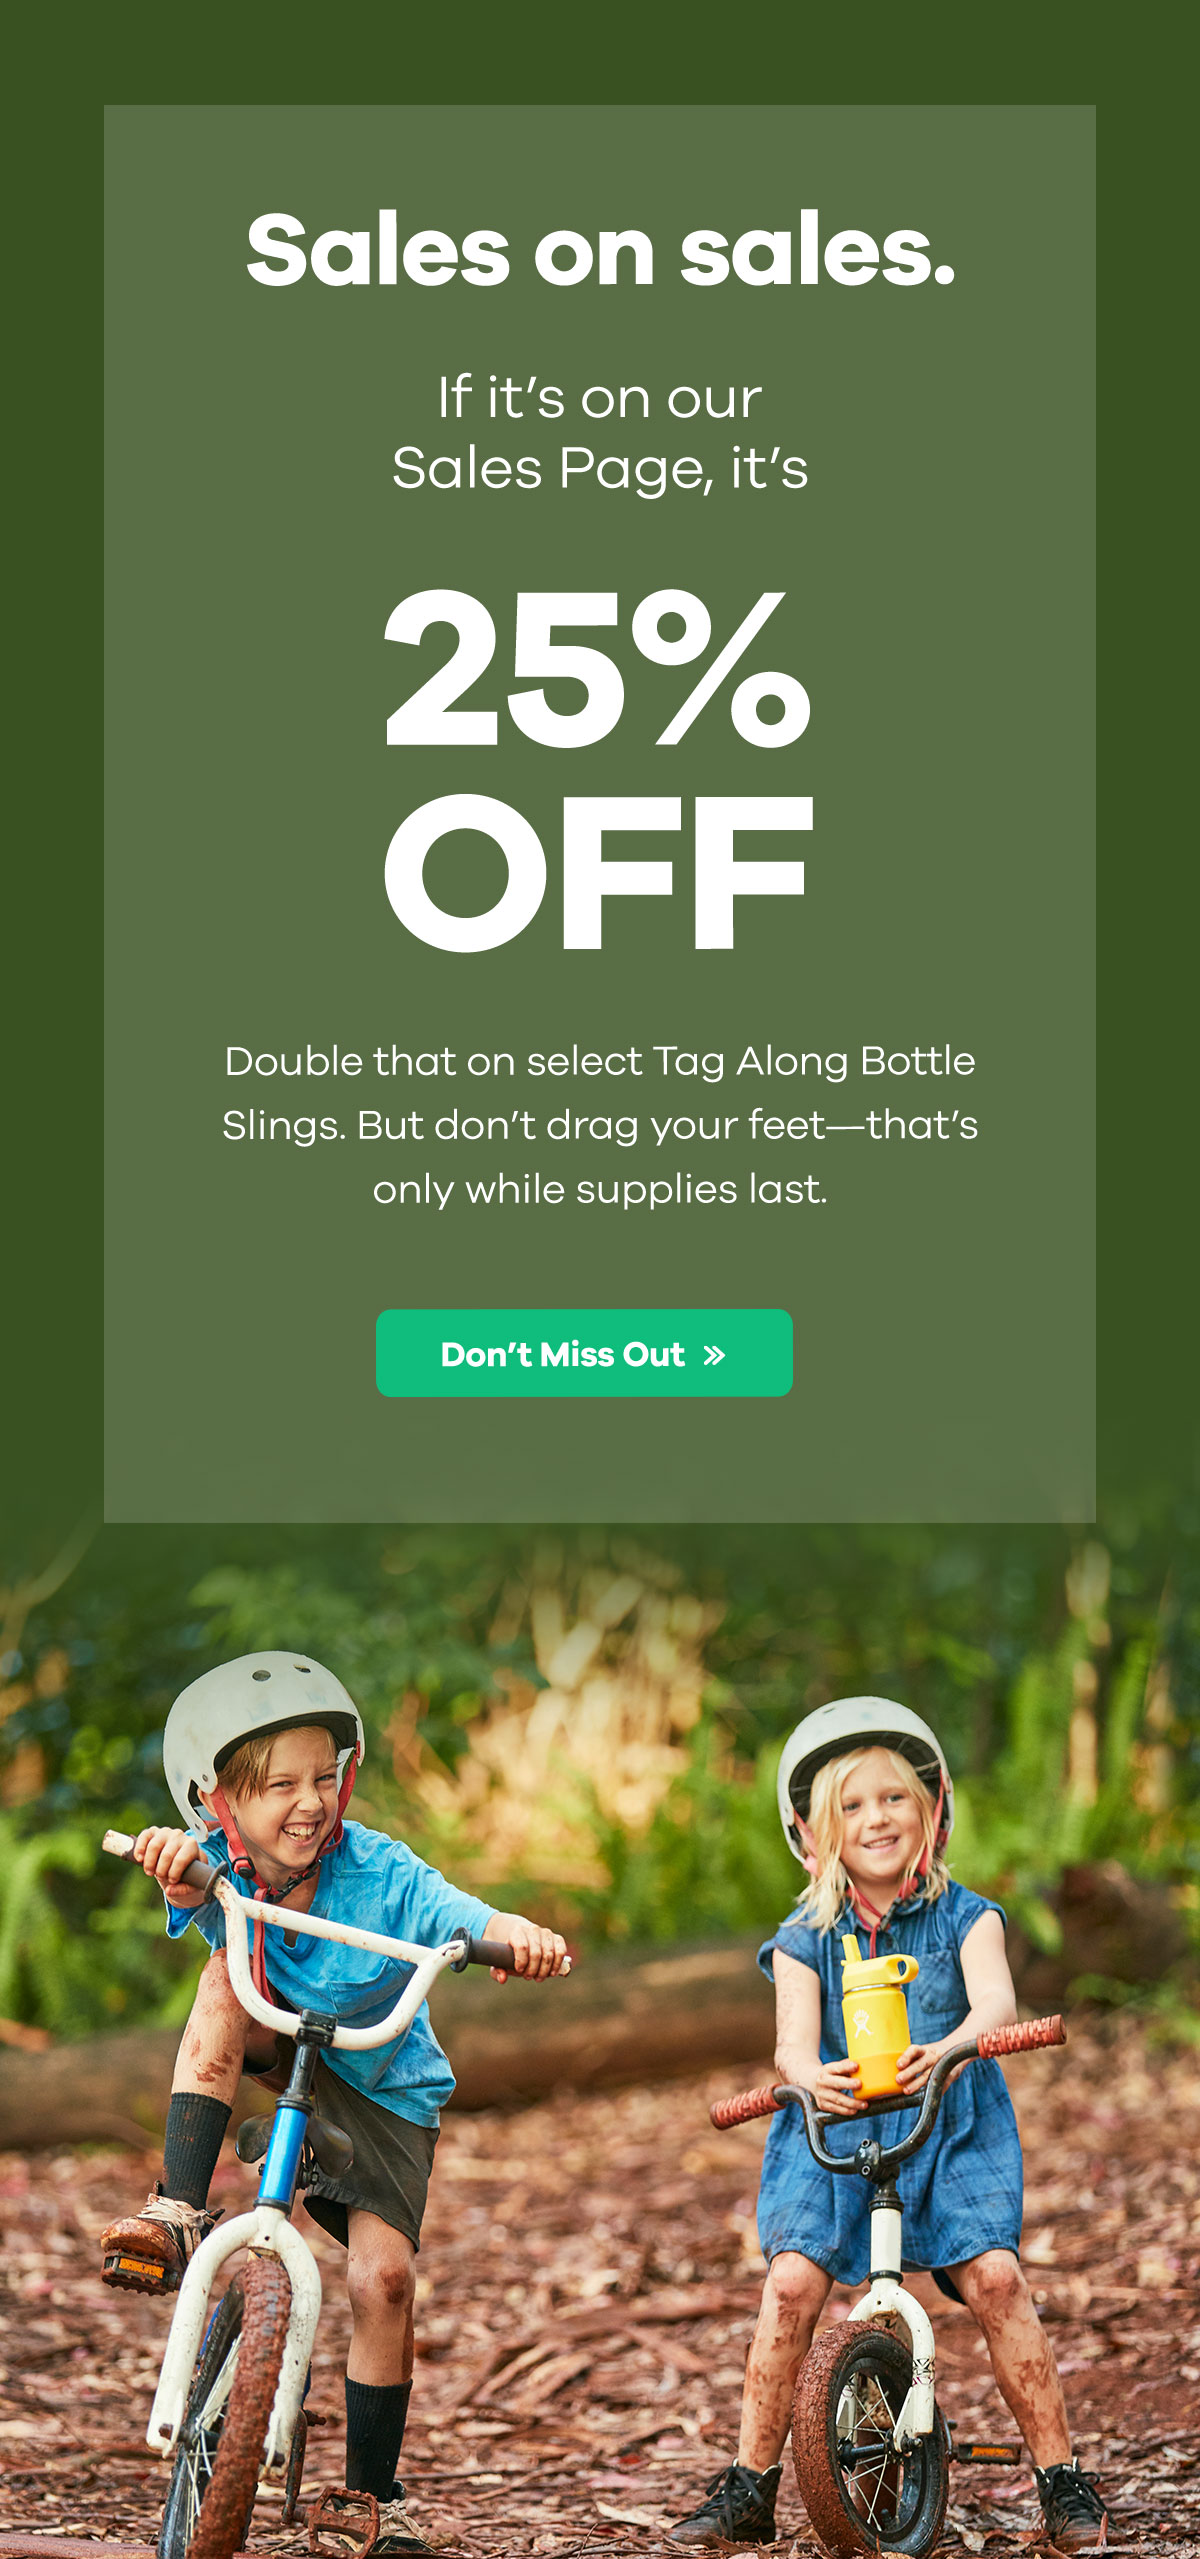 Sales on sales. If it's on our Sales Page, it's 25% off. Double that on select Tag Along Bottle Slings. But don't drag your feet-that's only while supplies last. | Don't Miss Out >>